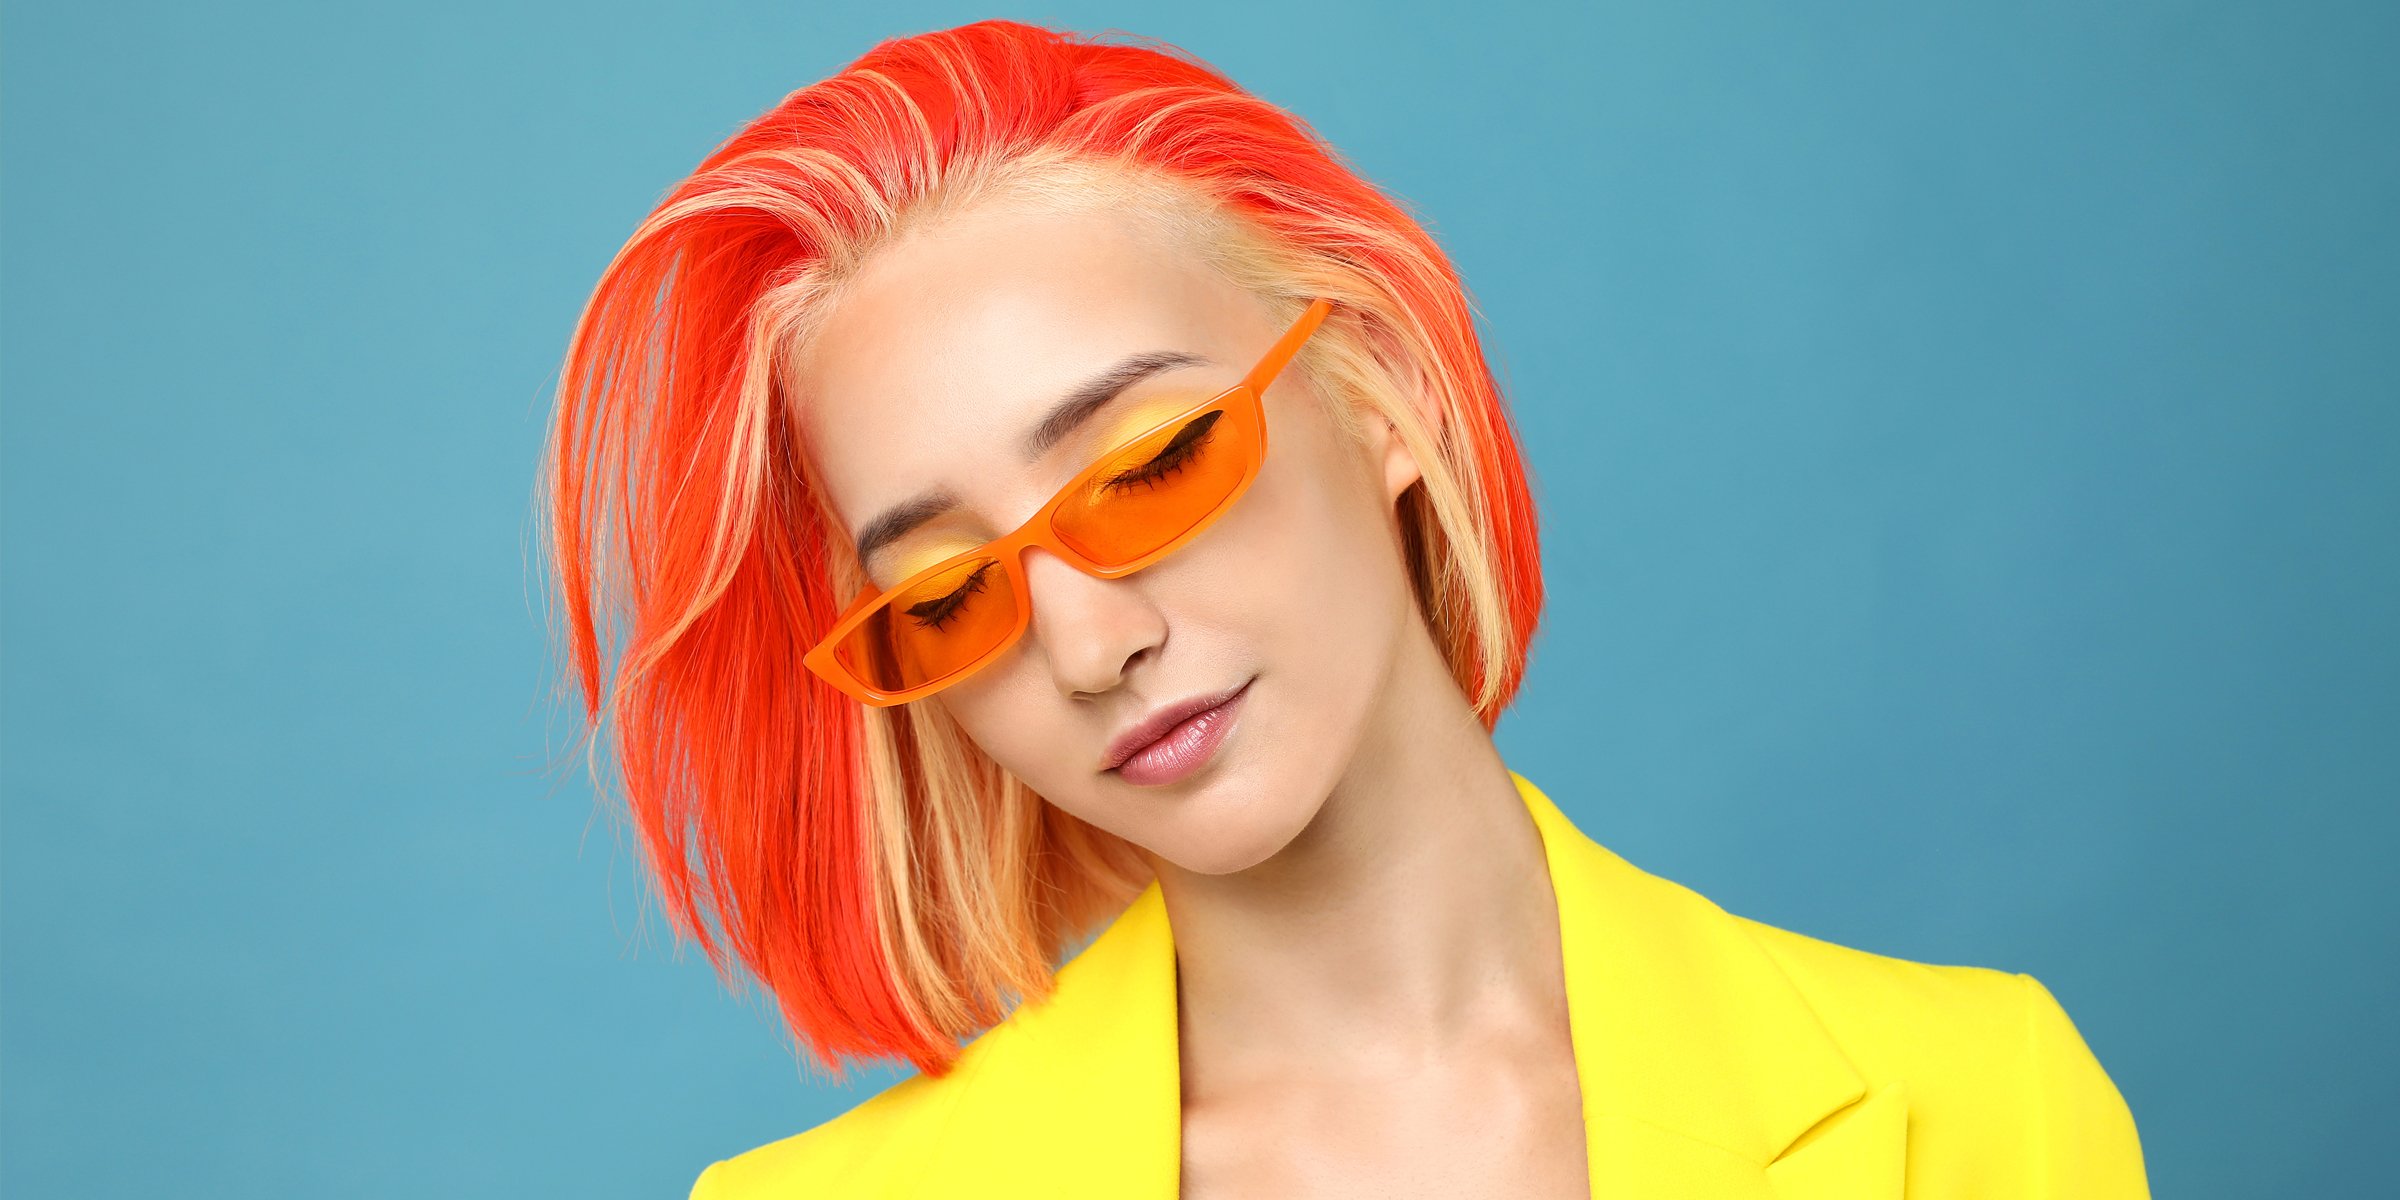 A Woman with an Orange Hair-Colored Bob Hairstyle with Blonde Highlights | Source: Shutterstock